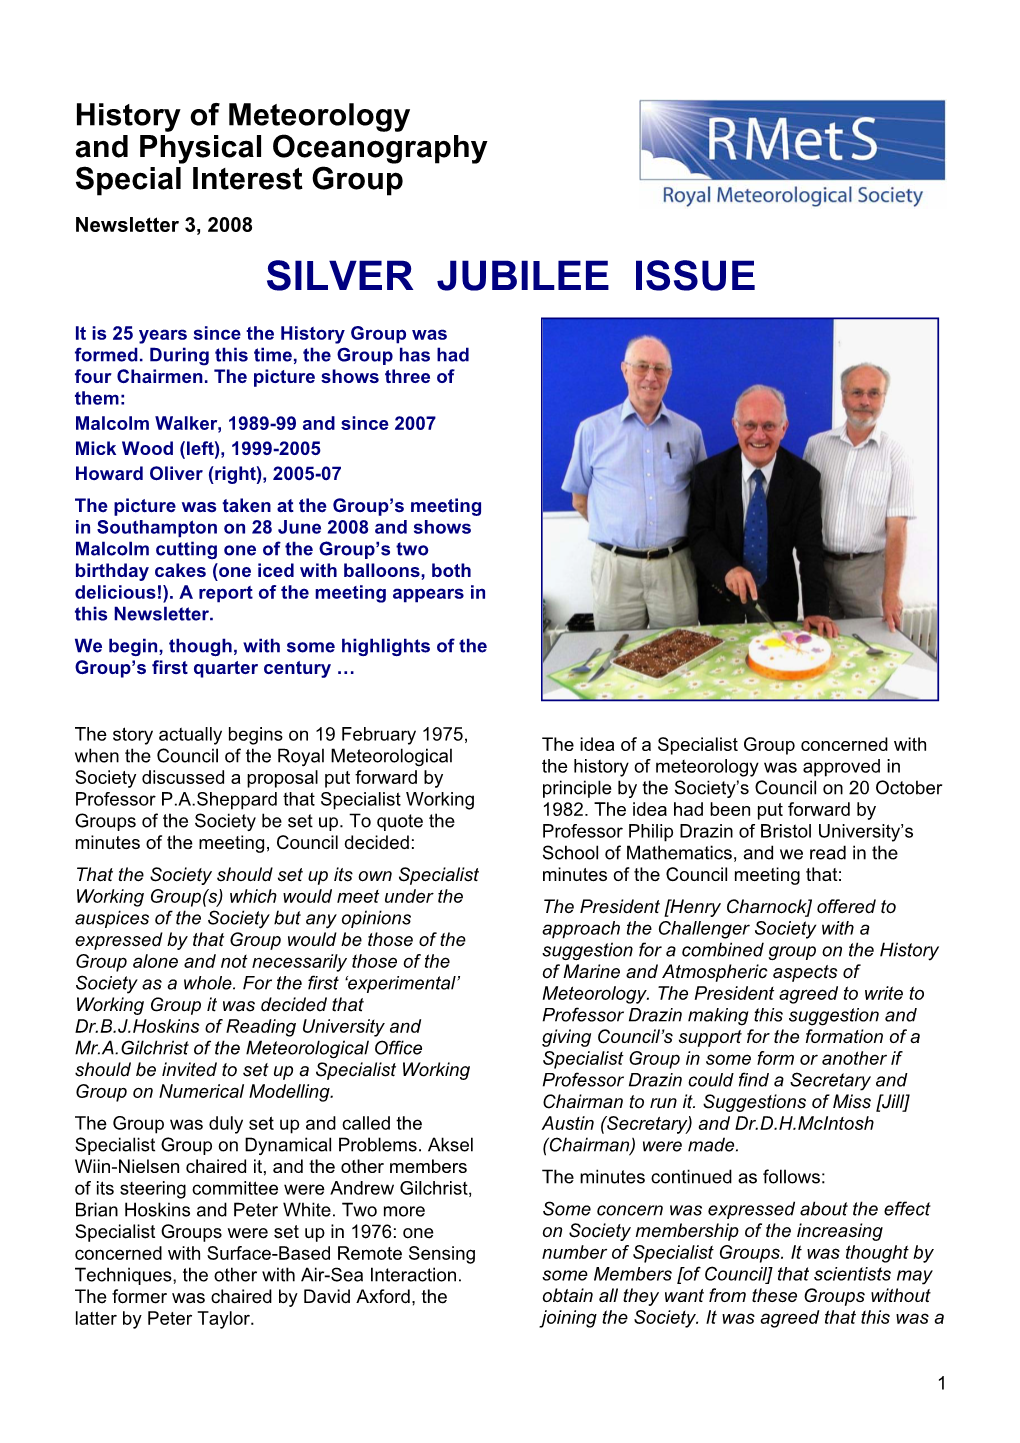 The History Group's Silver Jubilee